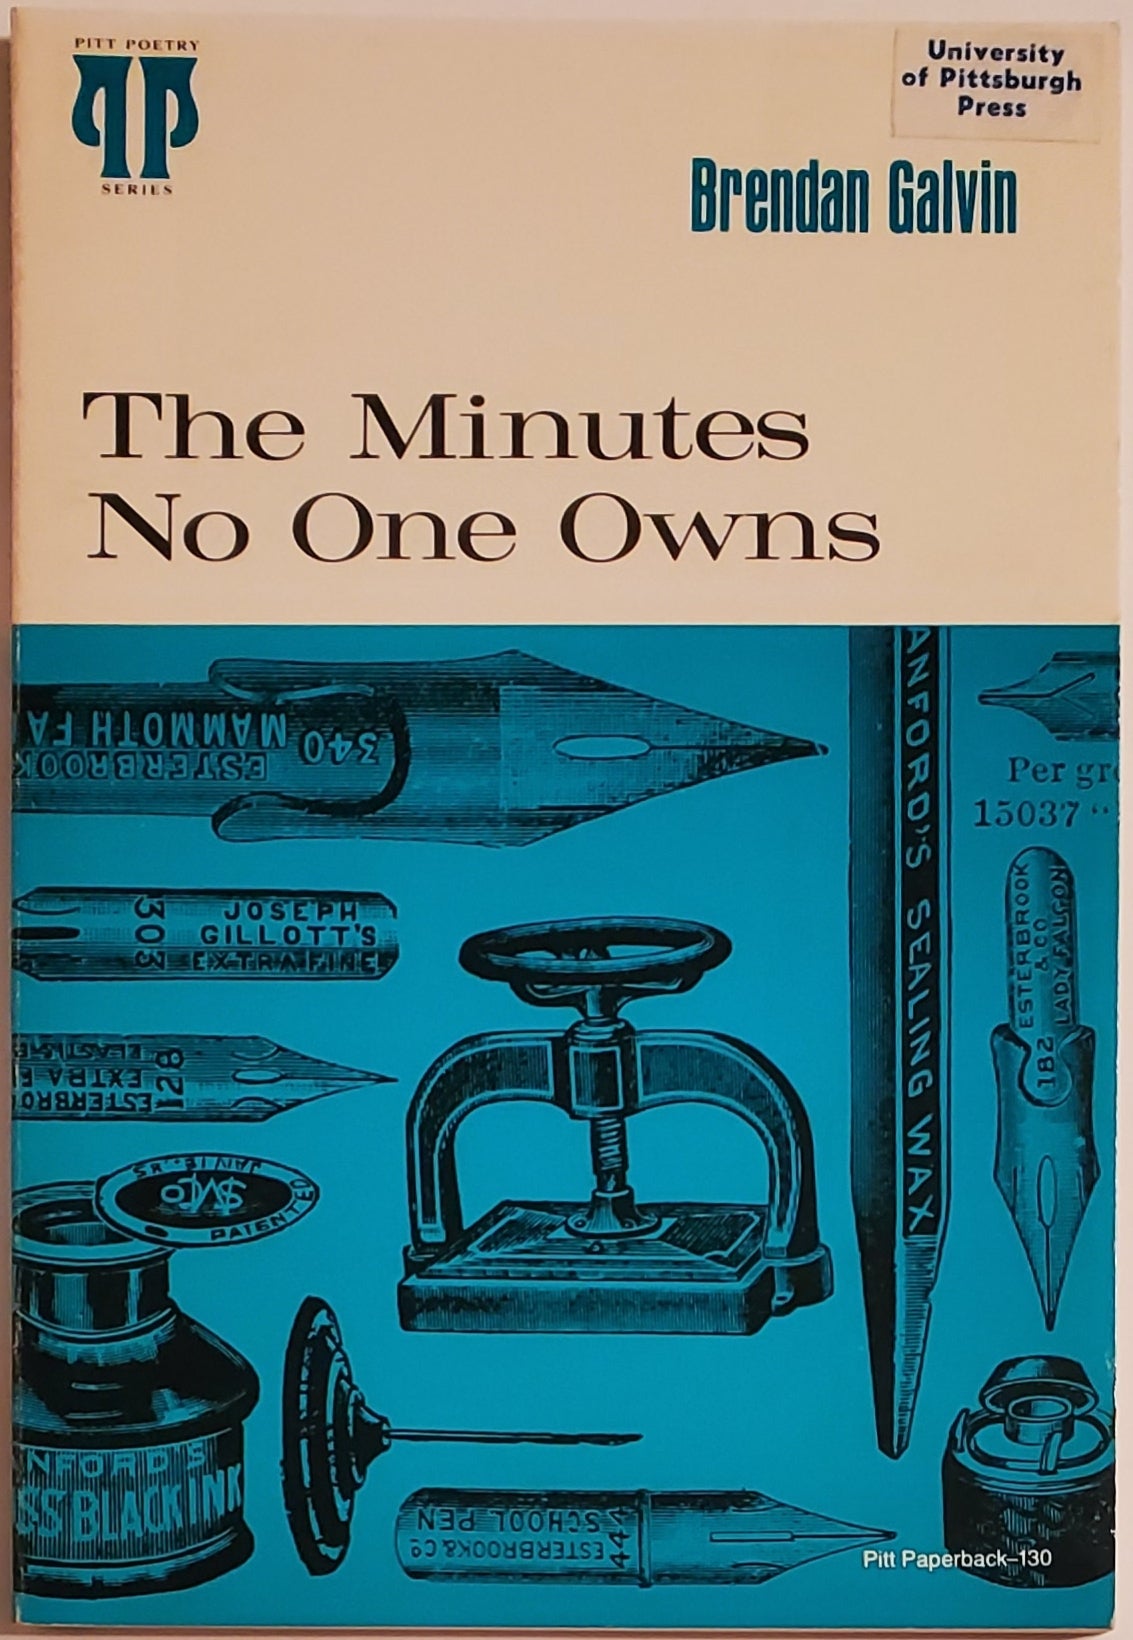 [Book #29297] THE MINUTES NO ONE OWNS. Brendan Galvin.